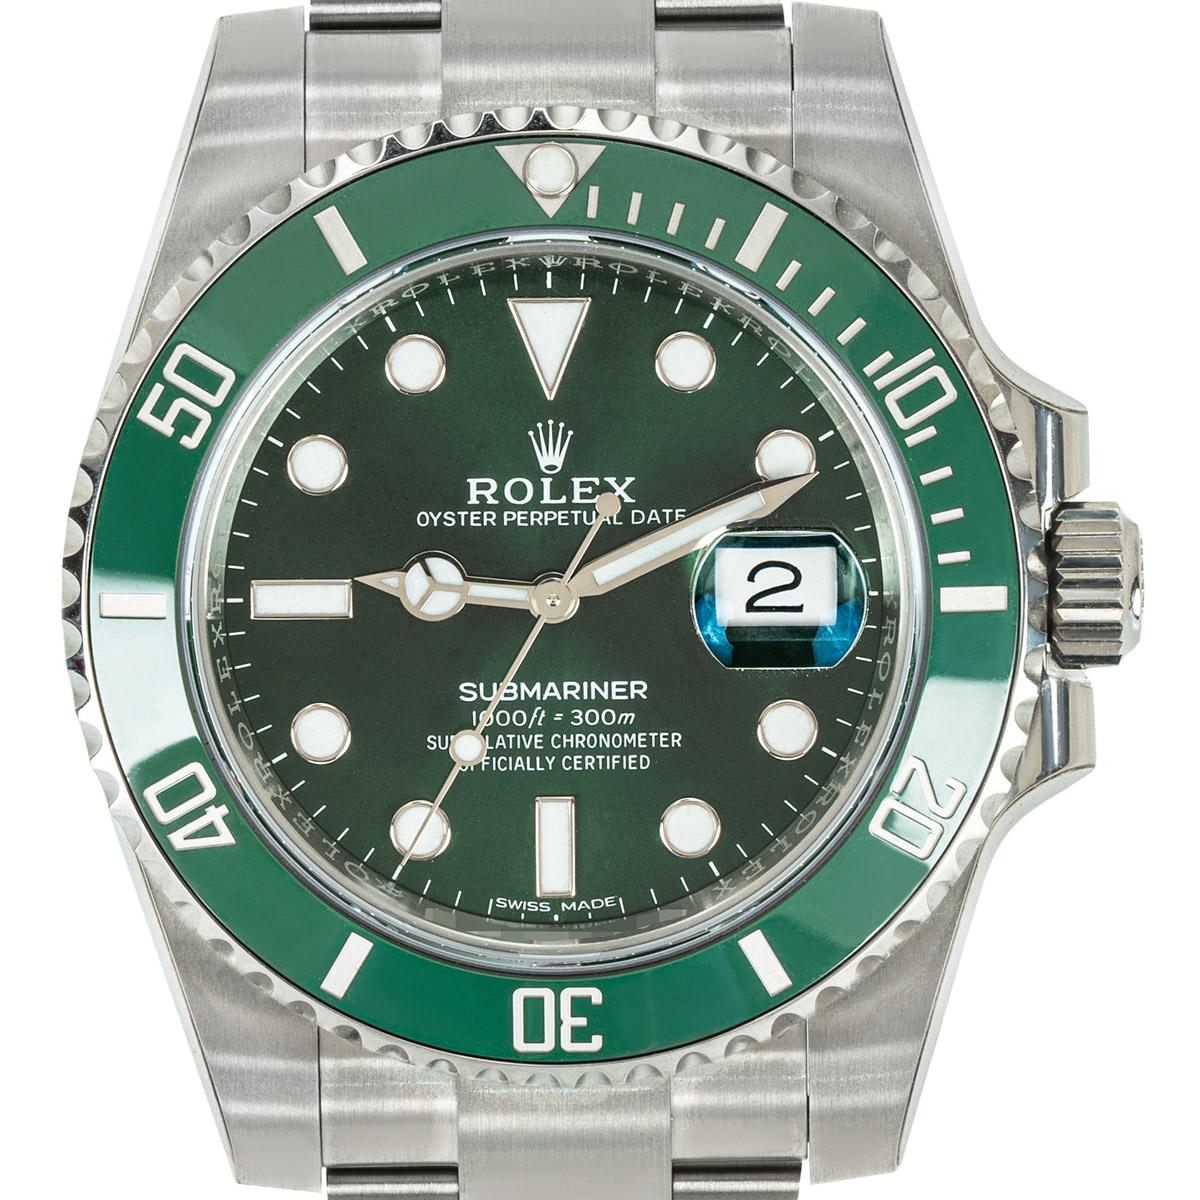 An unworn Submariner Date Hulk in Oystersteel by Rolex. Featuring a green dial and green unidirectional rotatable ceramic bezel with 60 minute graduations. The Oyster bracelet comes equipped with a folding Oysterlock clasp. Fitted with a scratch